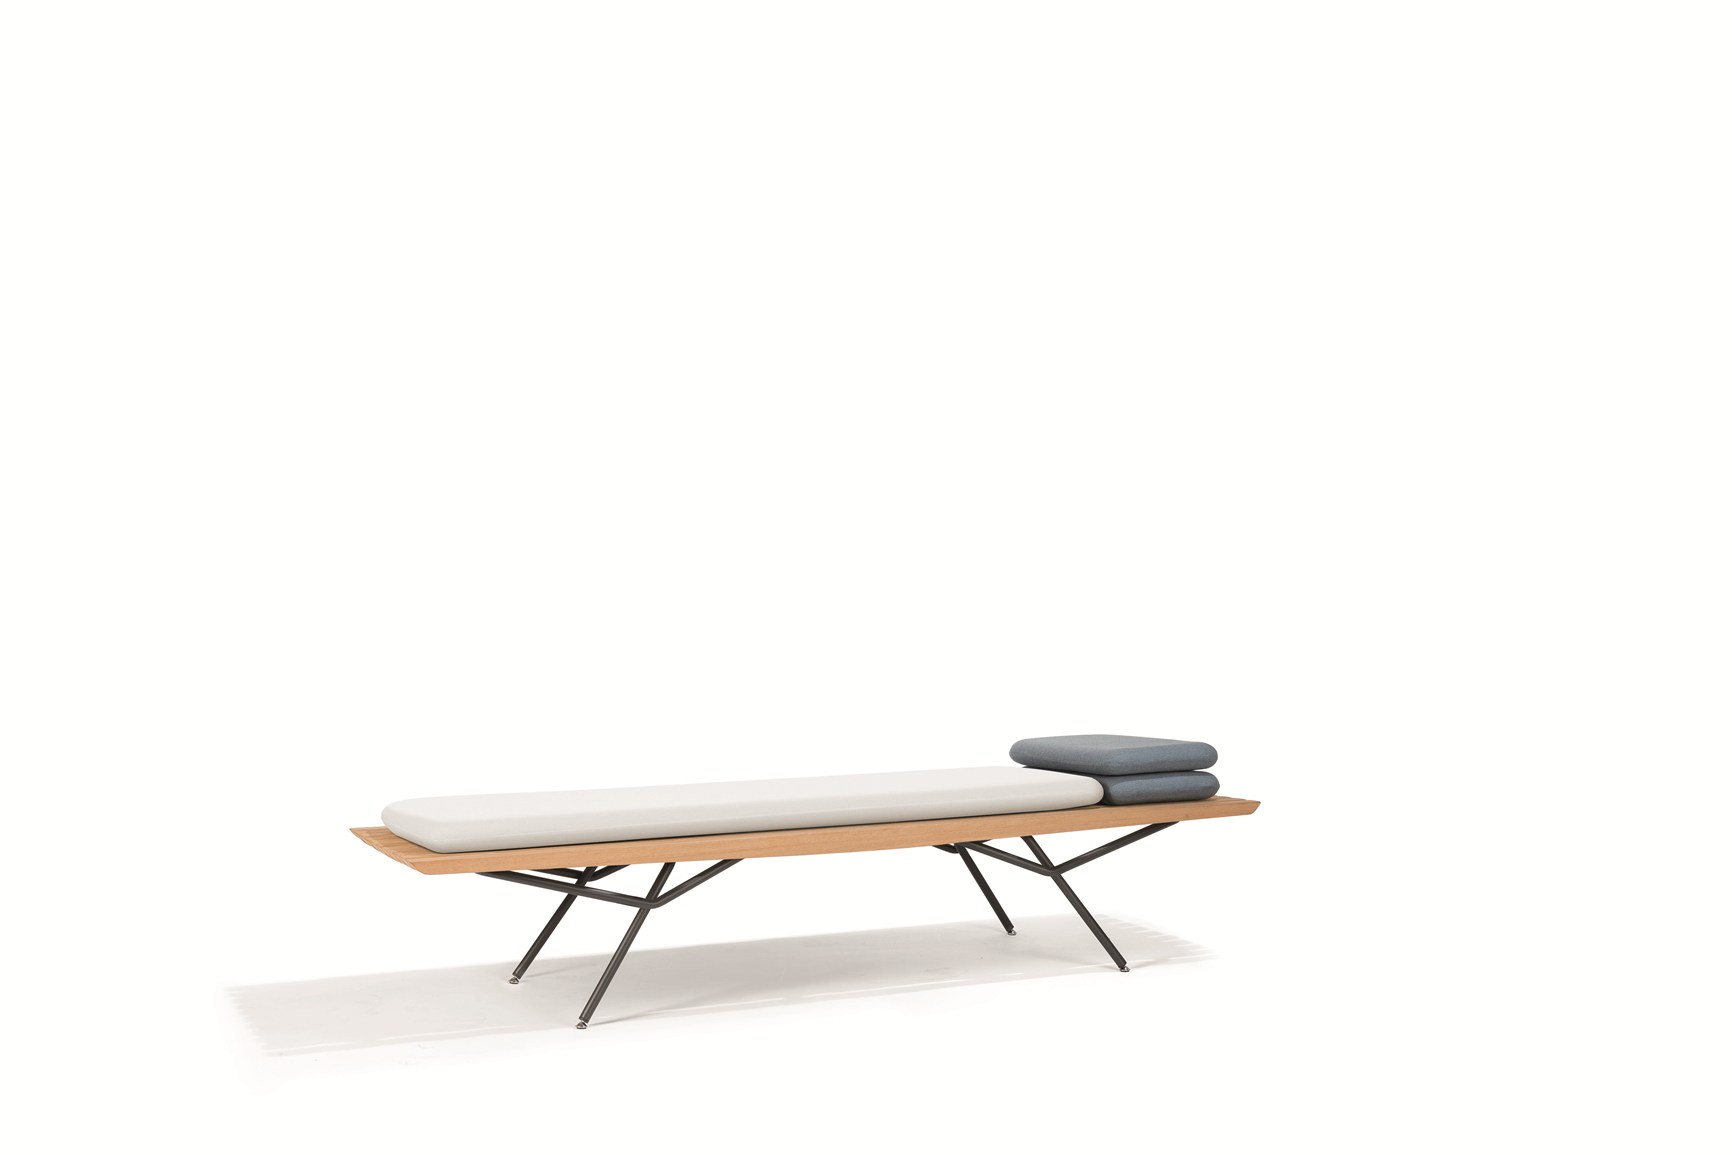 San Collection by Lionel Doyen for Manutti